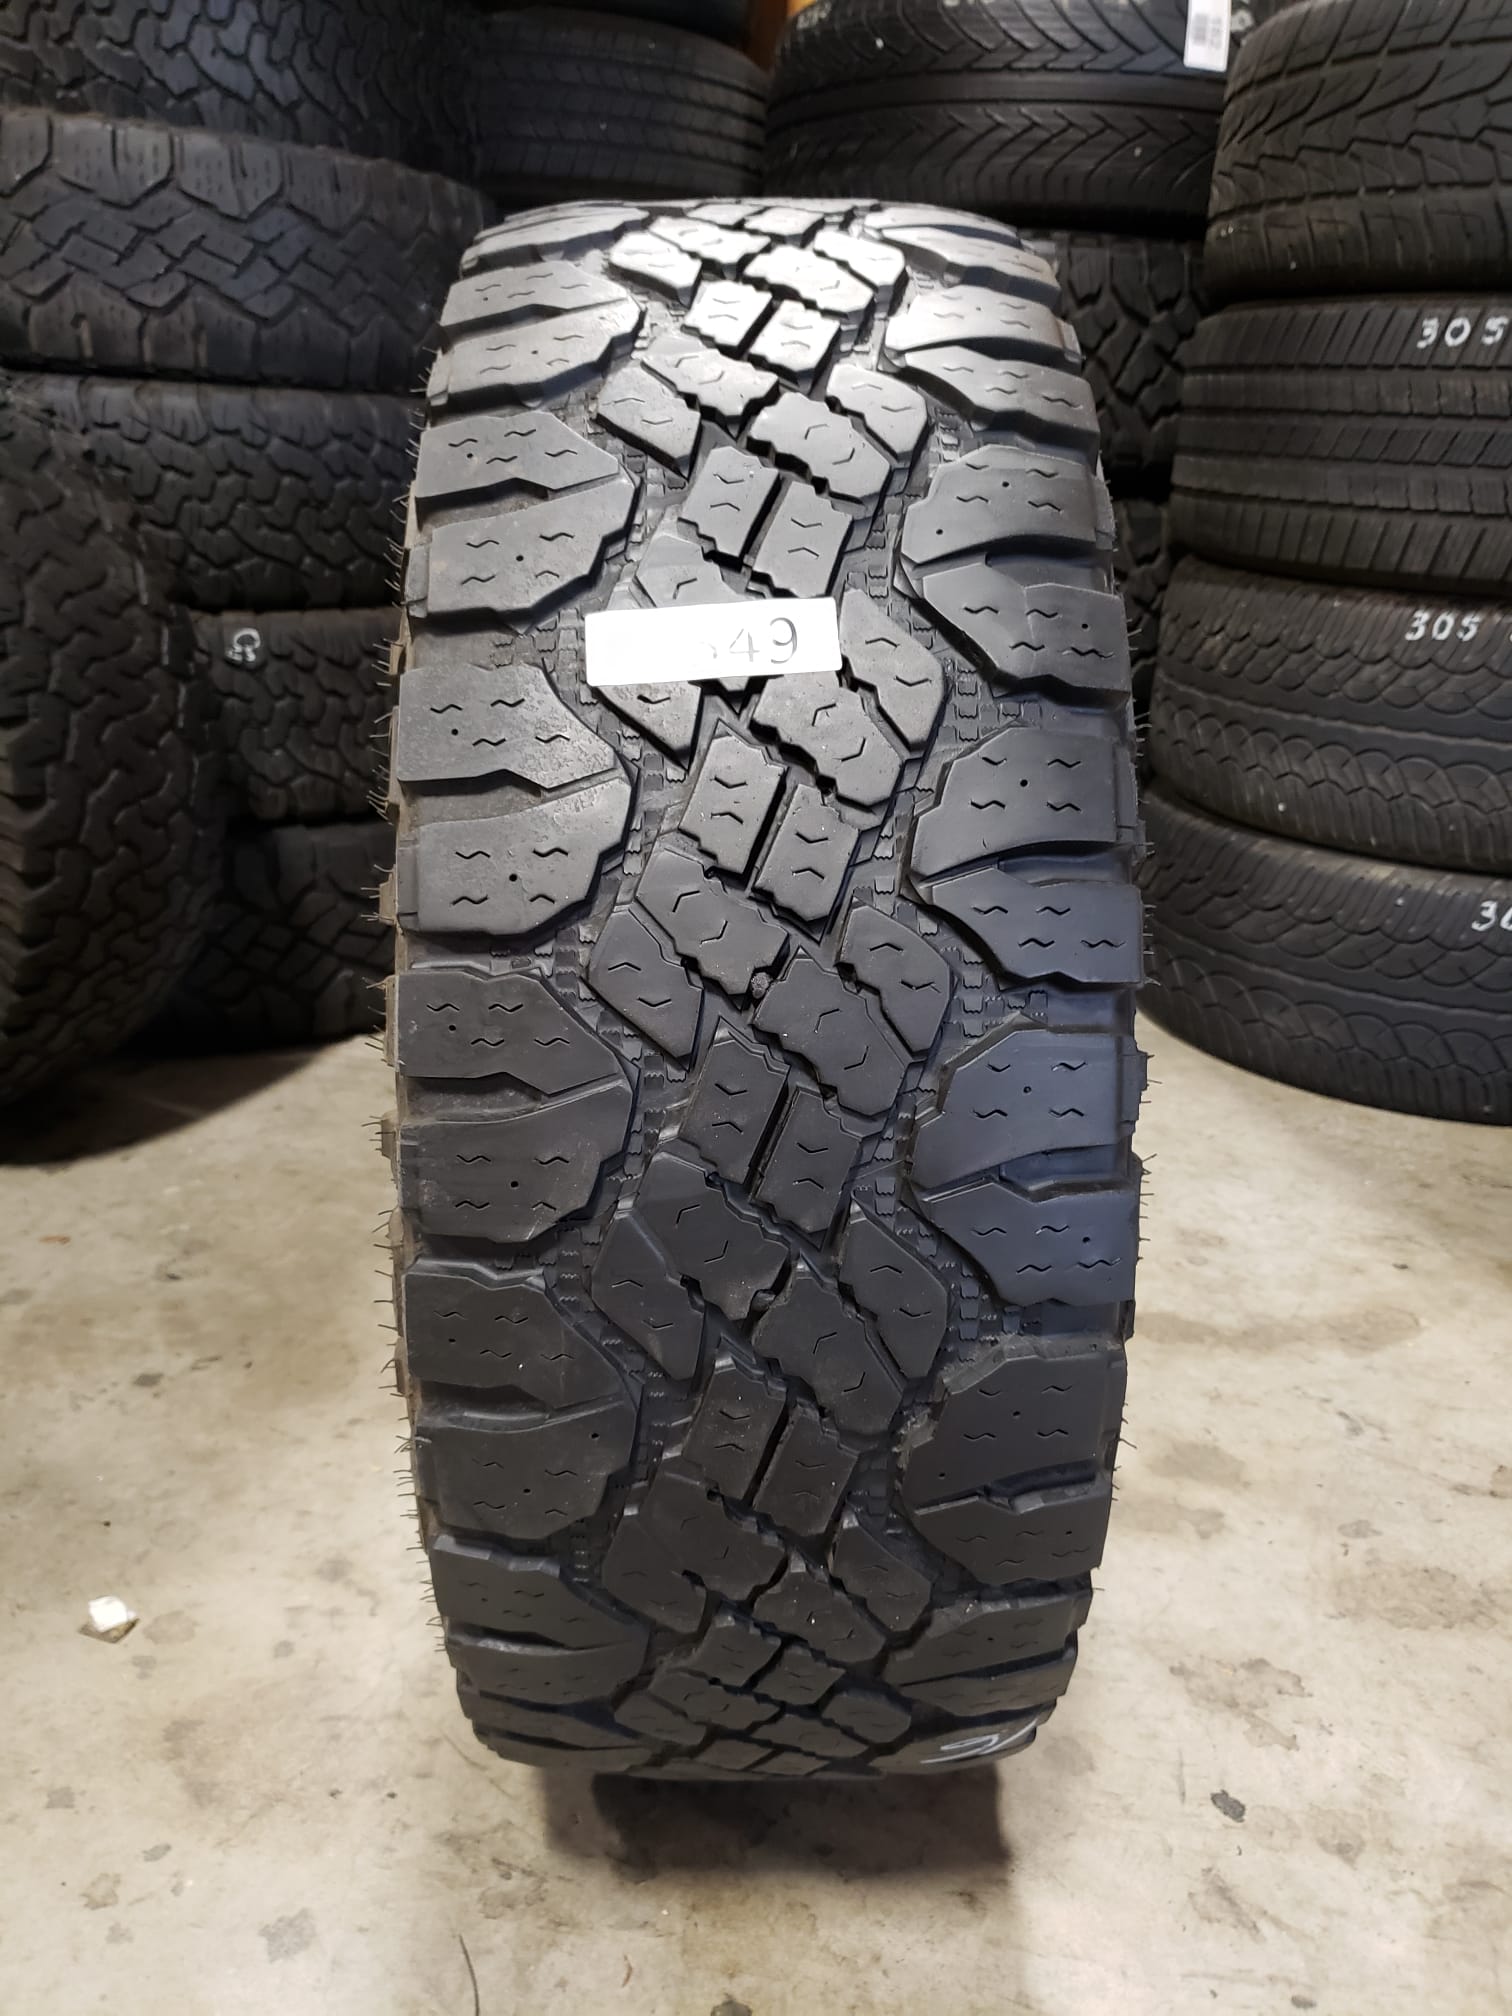 SET OF 2 315/75R16 Goodyear Wrangler Duratrac - Used Tires – High Tread  Used Tires